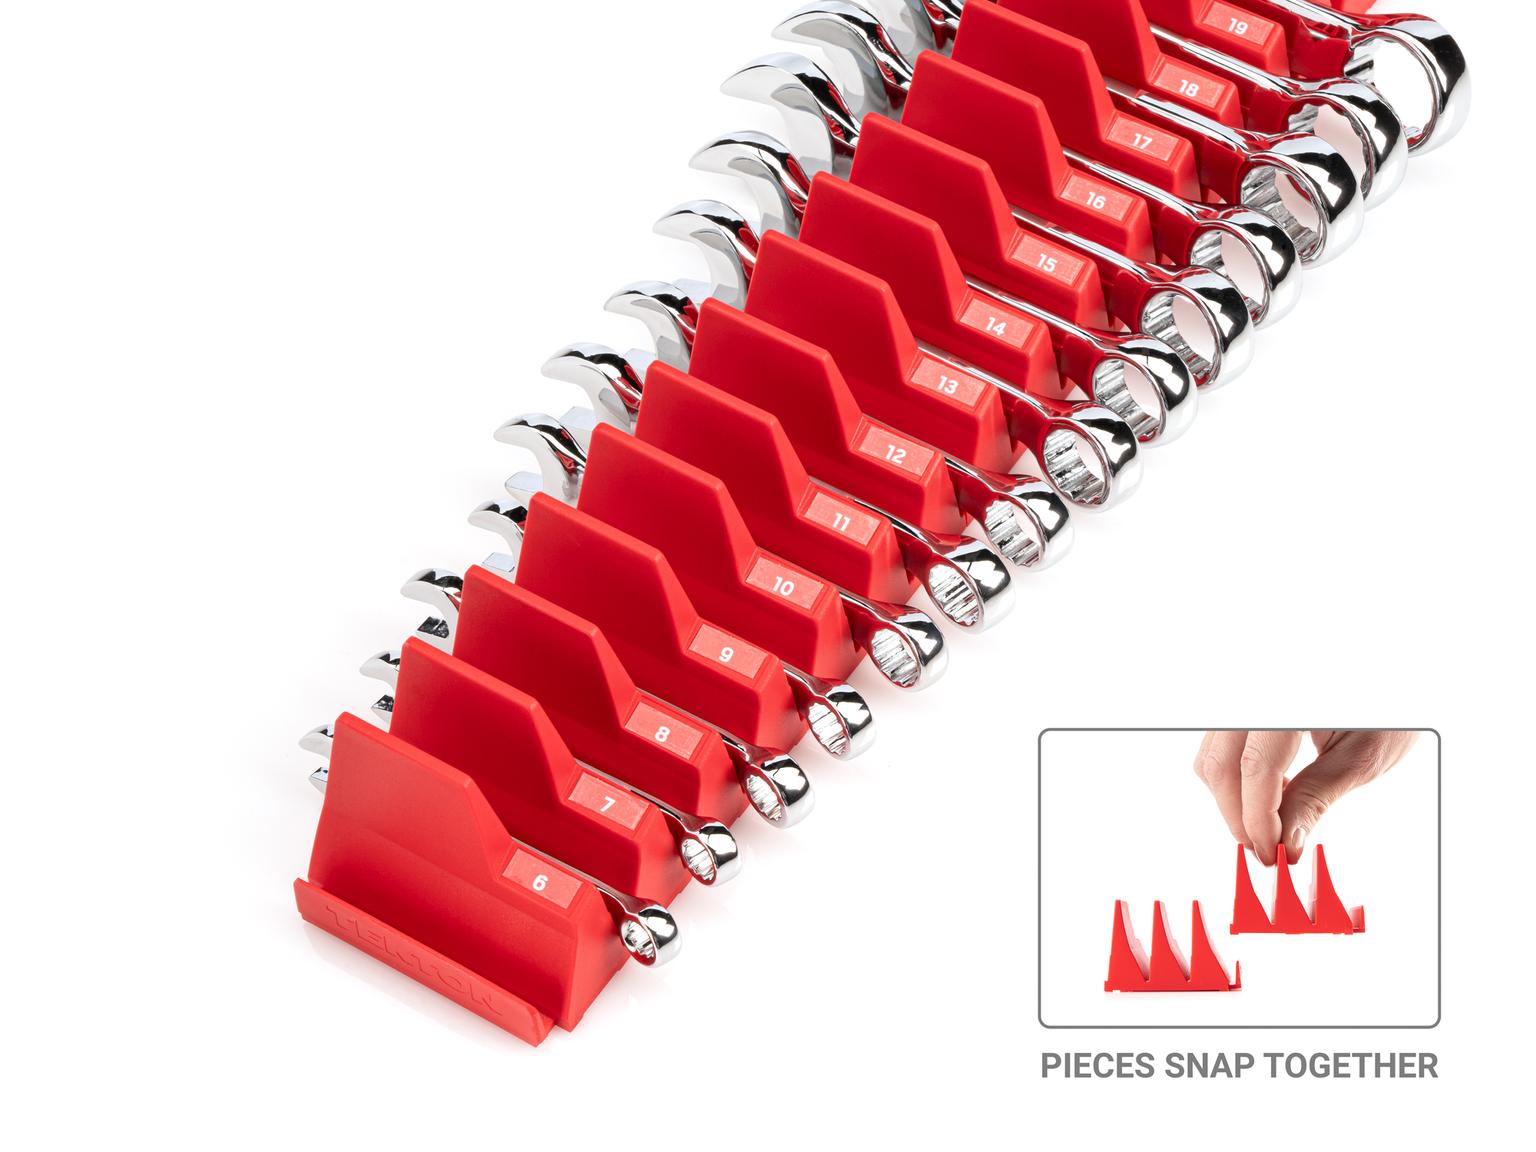 TEKTON WCB95402-T Stubby Combination Wrench Set with Modular Slotted Organizer, 14-Piece (6 - 19 mm)